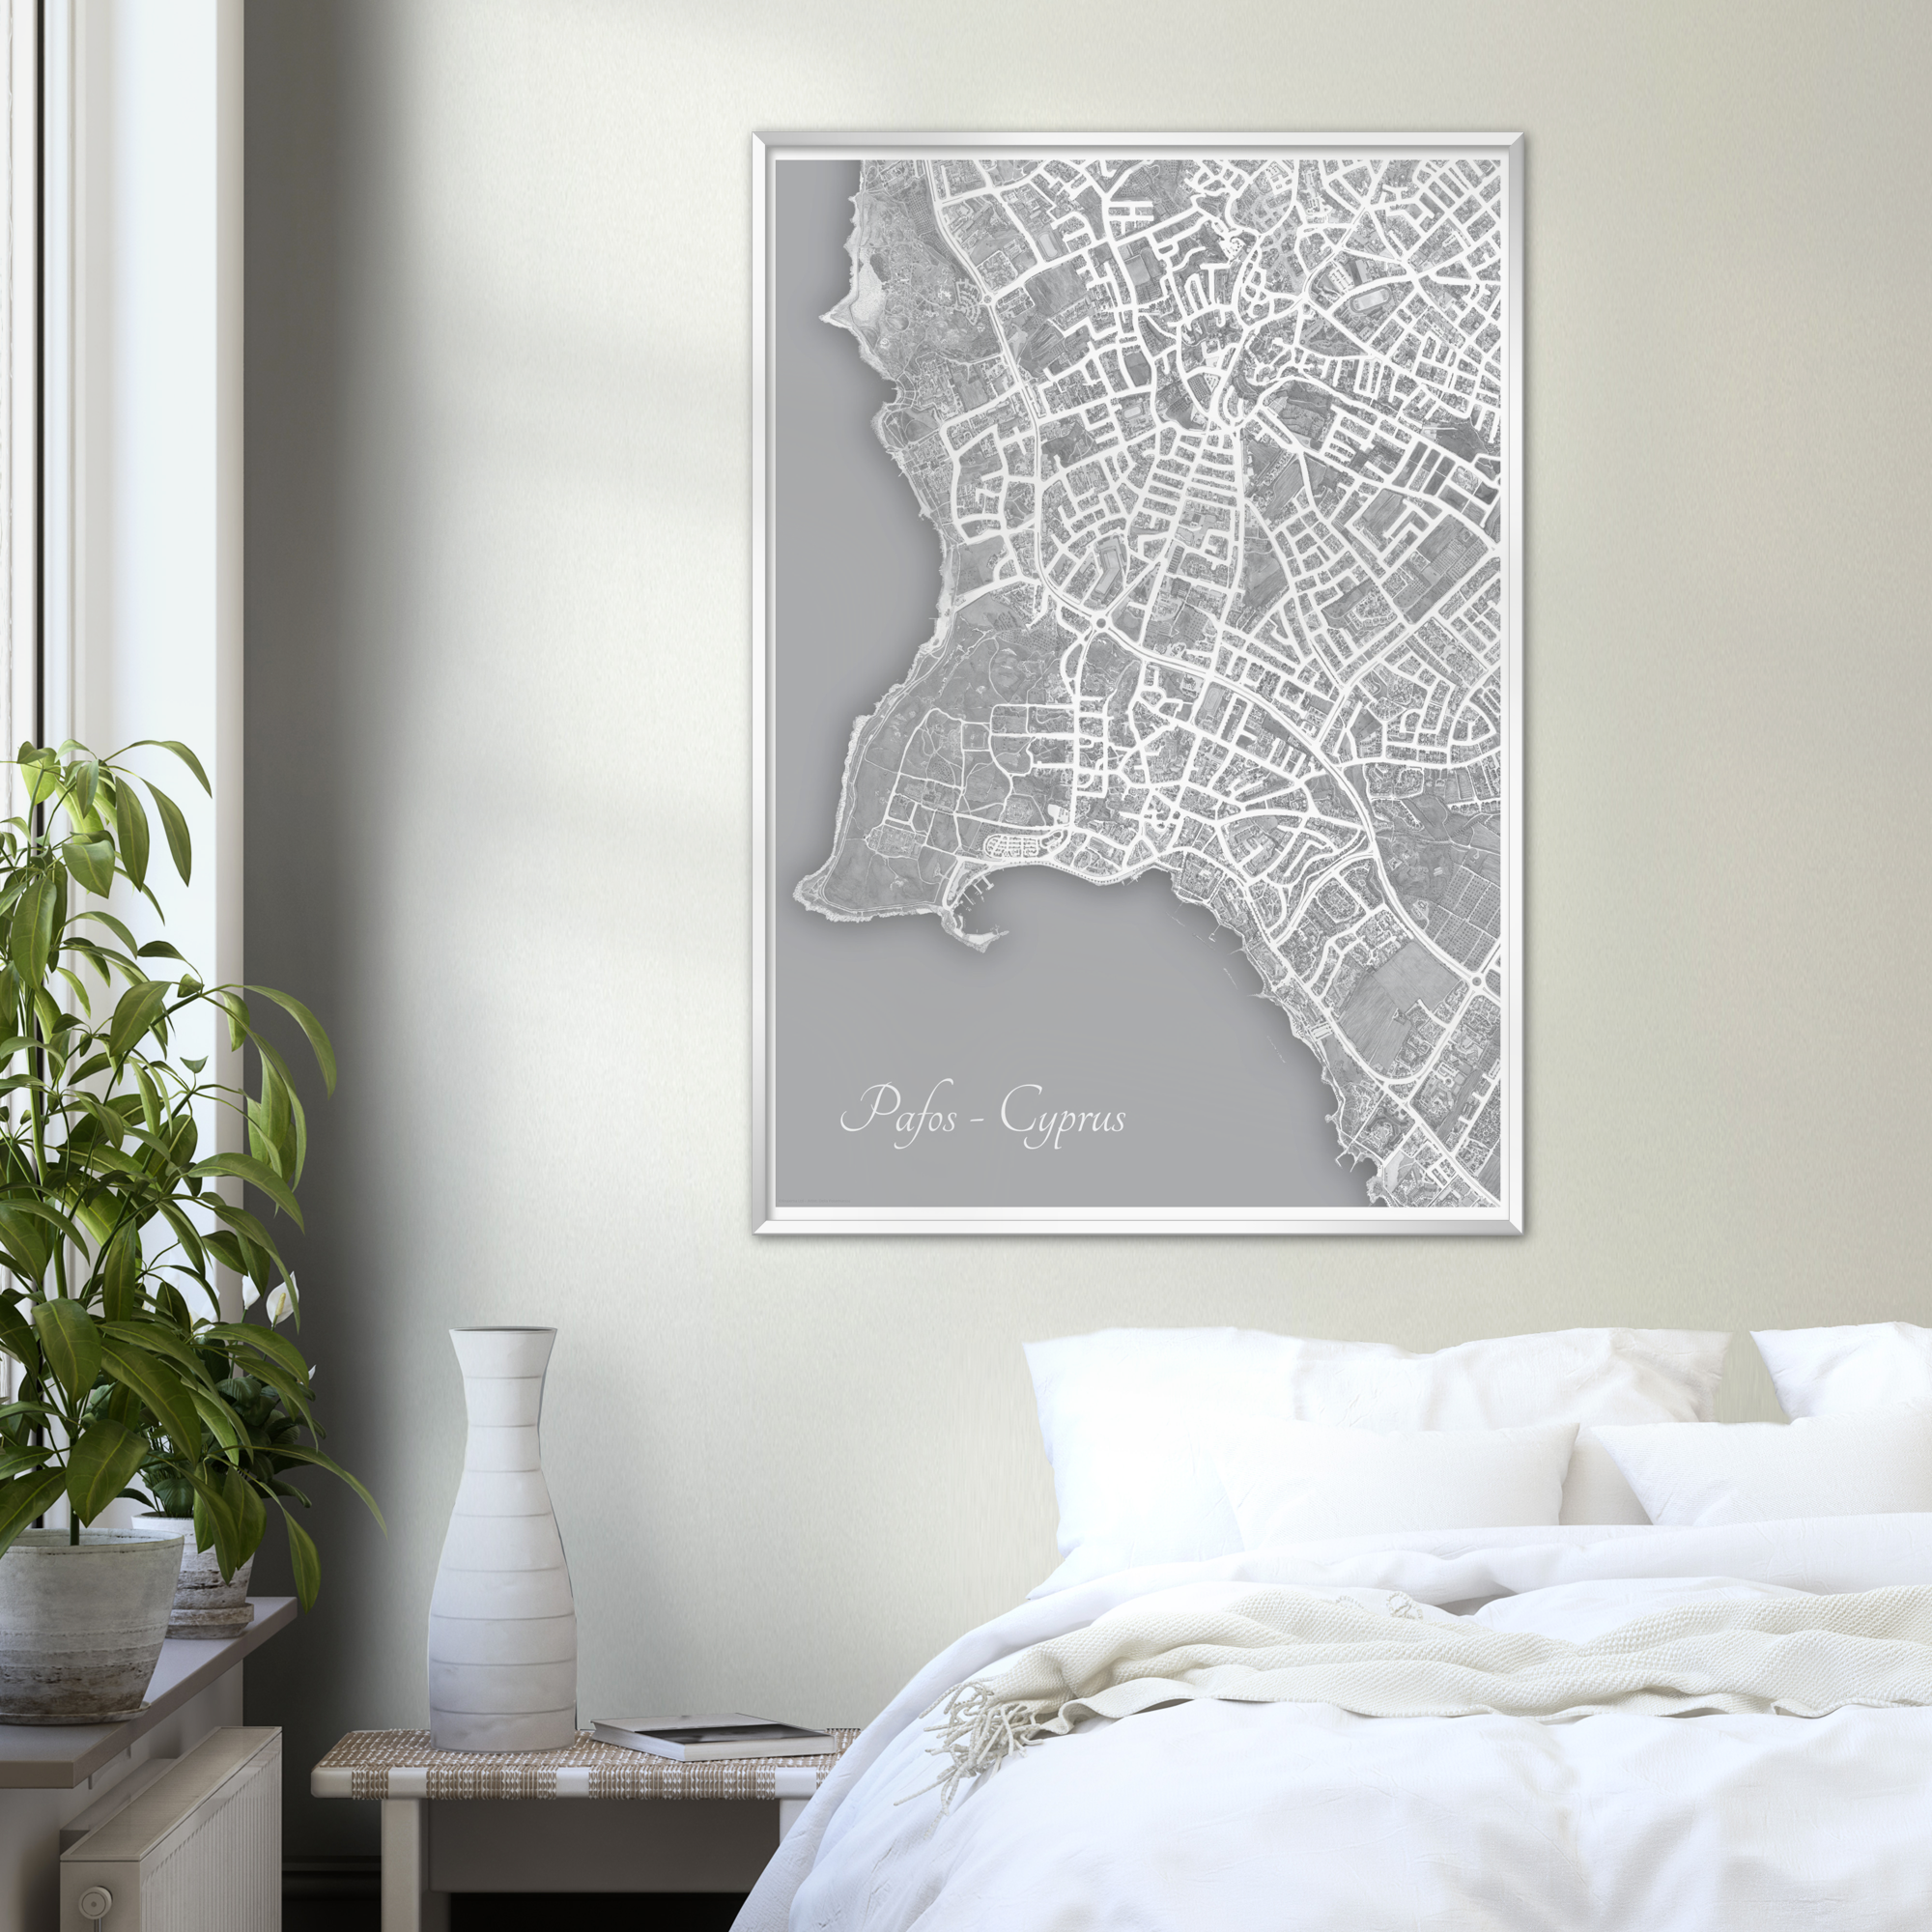 Pafos, Cyprus – Black & White Print – Metal Framed Poster